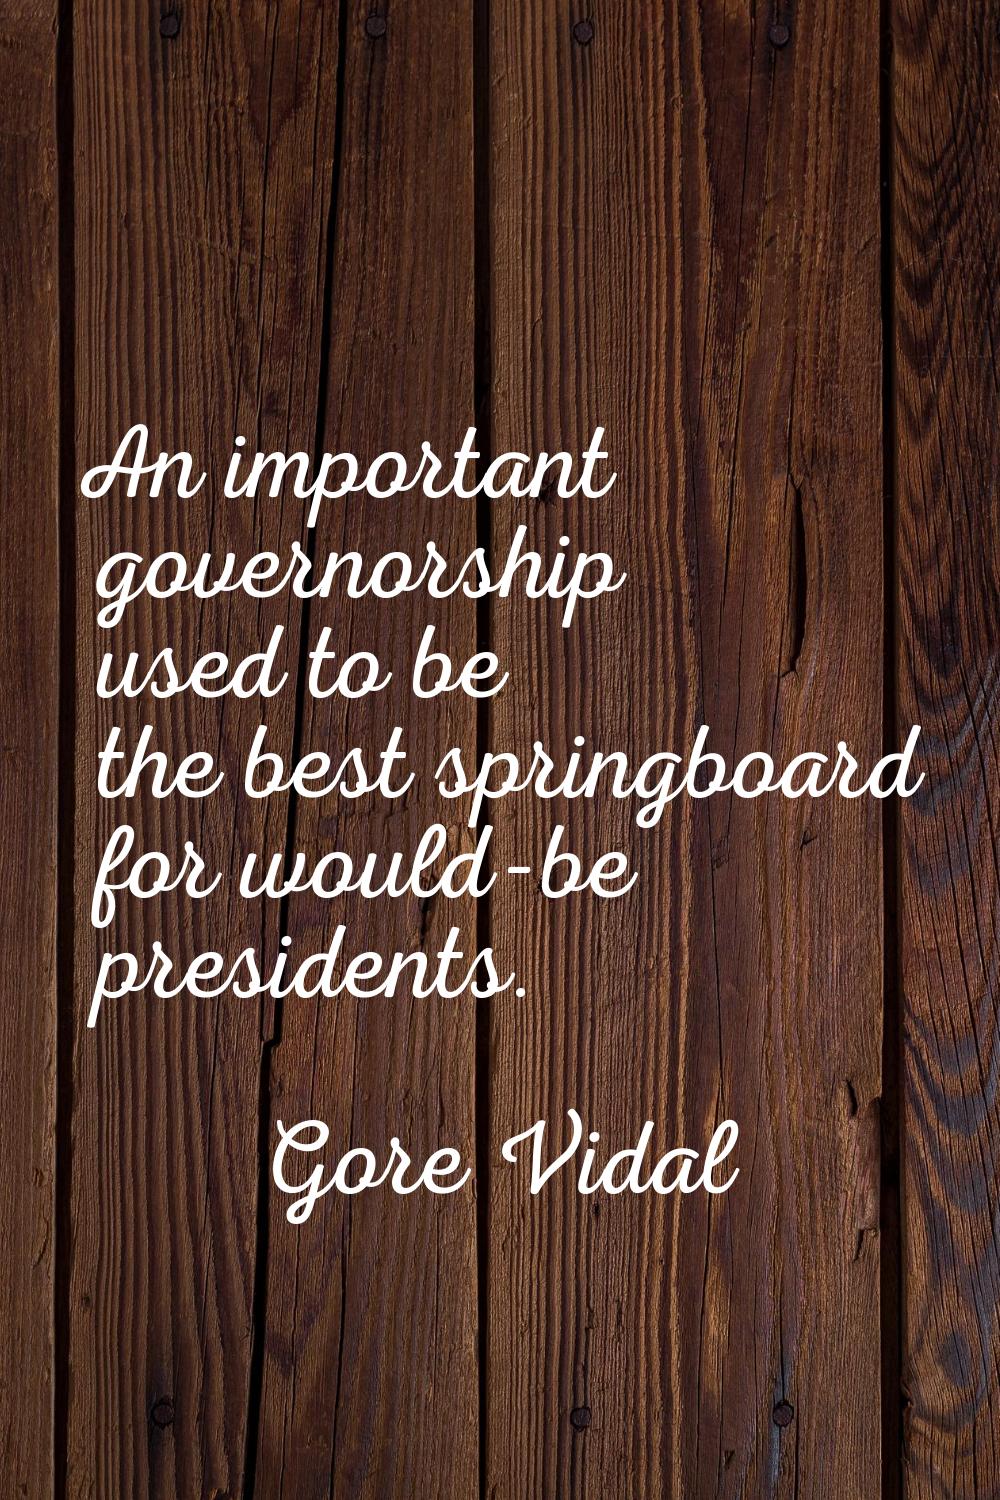 An important governorship used to be the best springboard for would-be presidents.